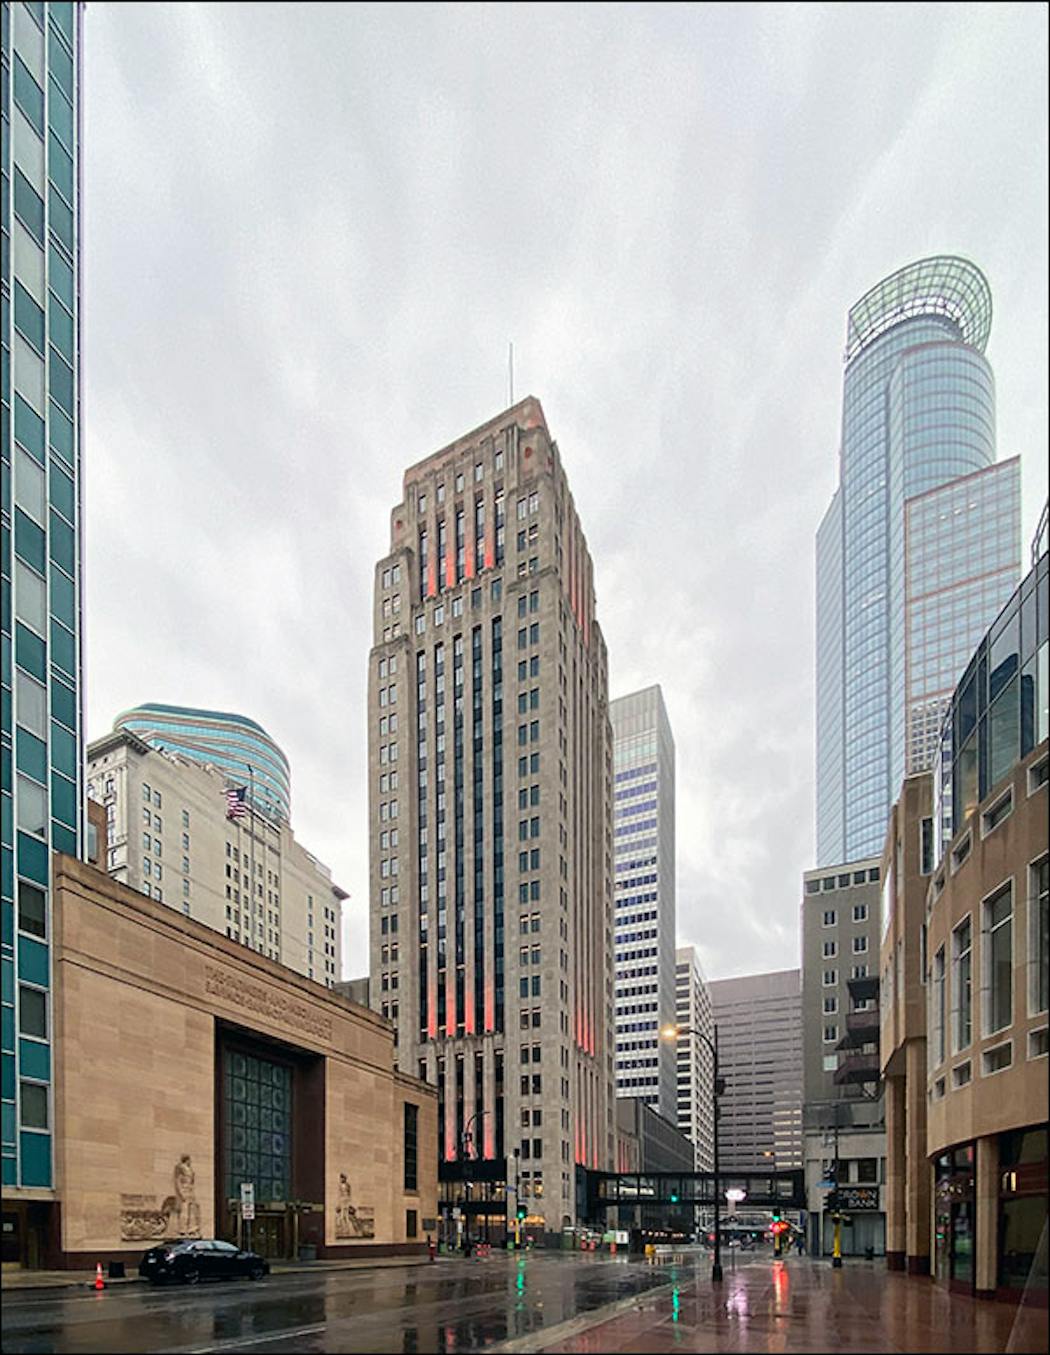 The Rand Tower at 527 S. Marquette Avenue in Minneapolis is now a hotel.